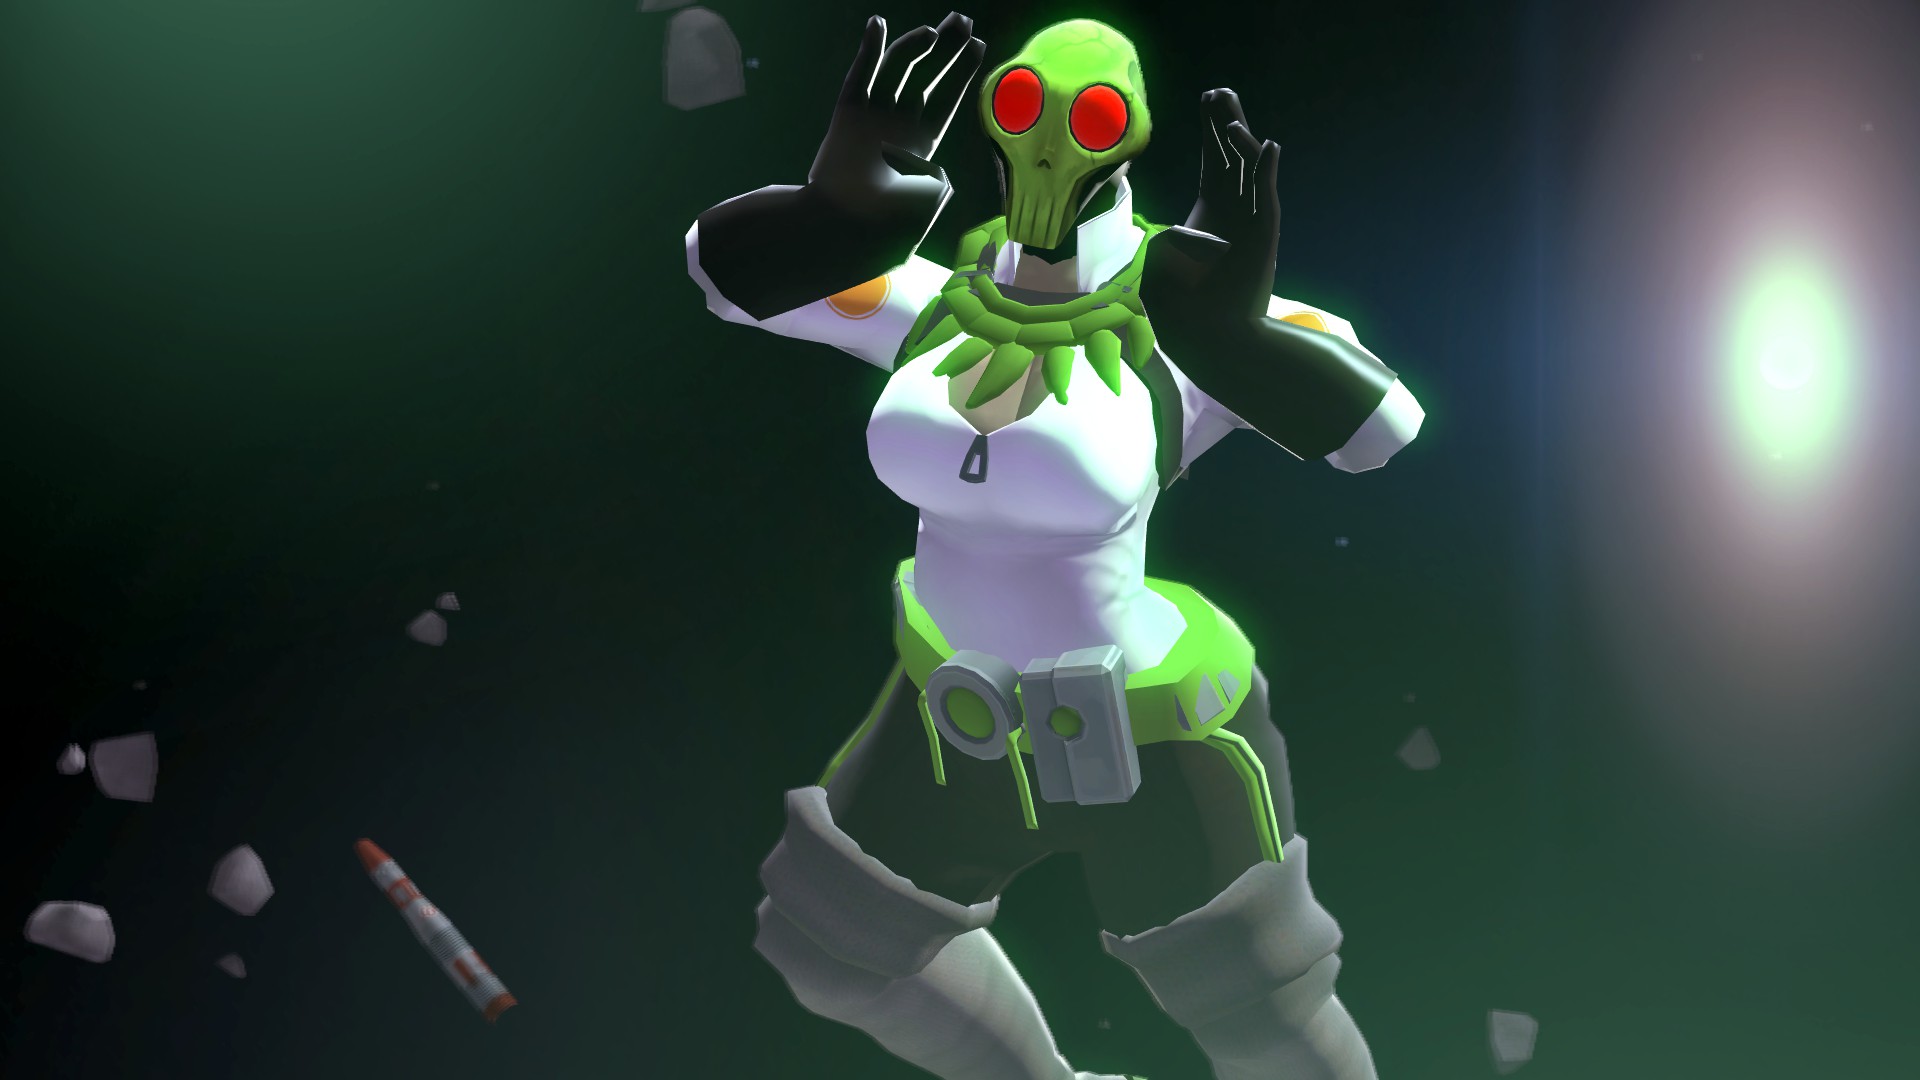 Low poly C-Moon pose GIF by Trevmarvel08 on DeviantArt